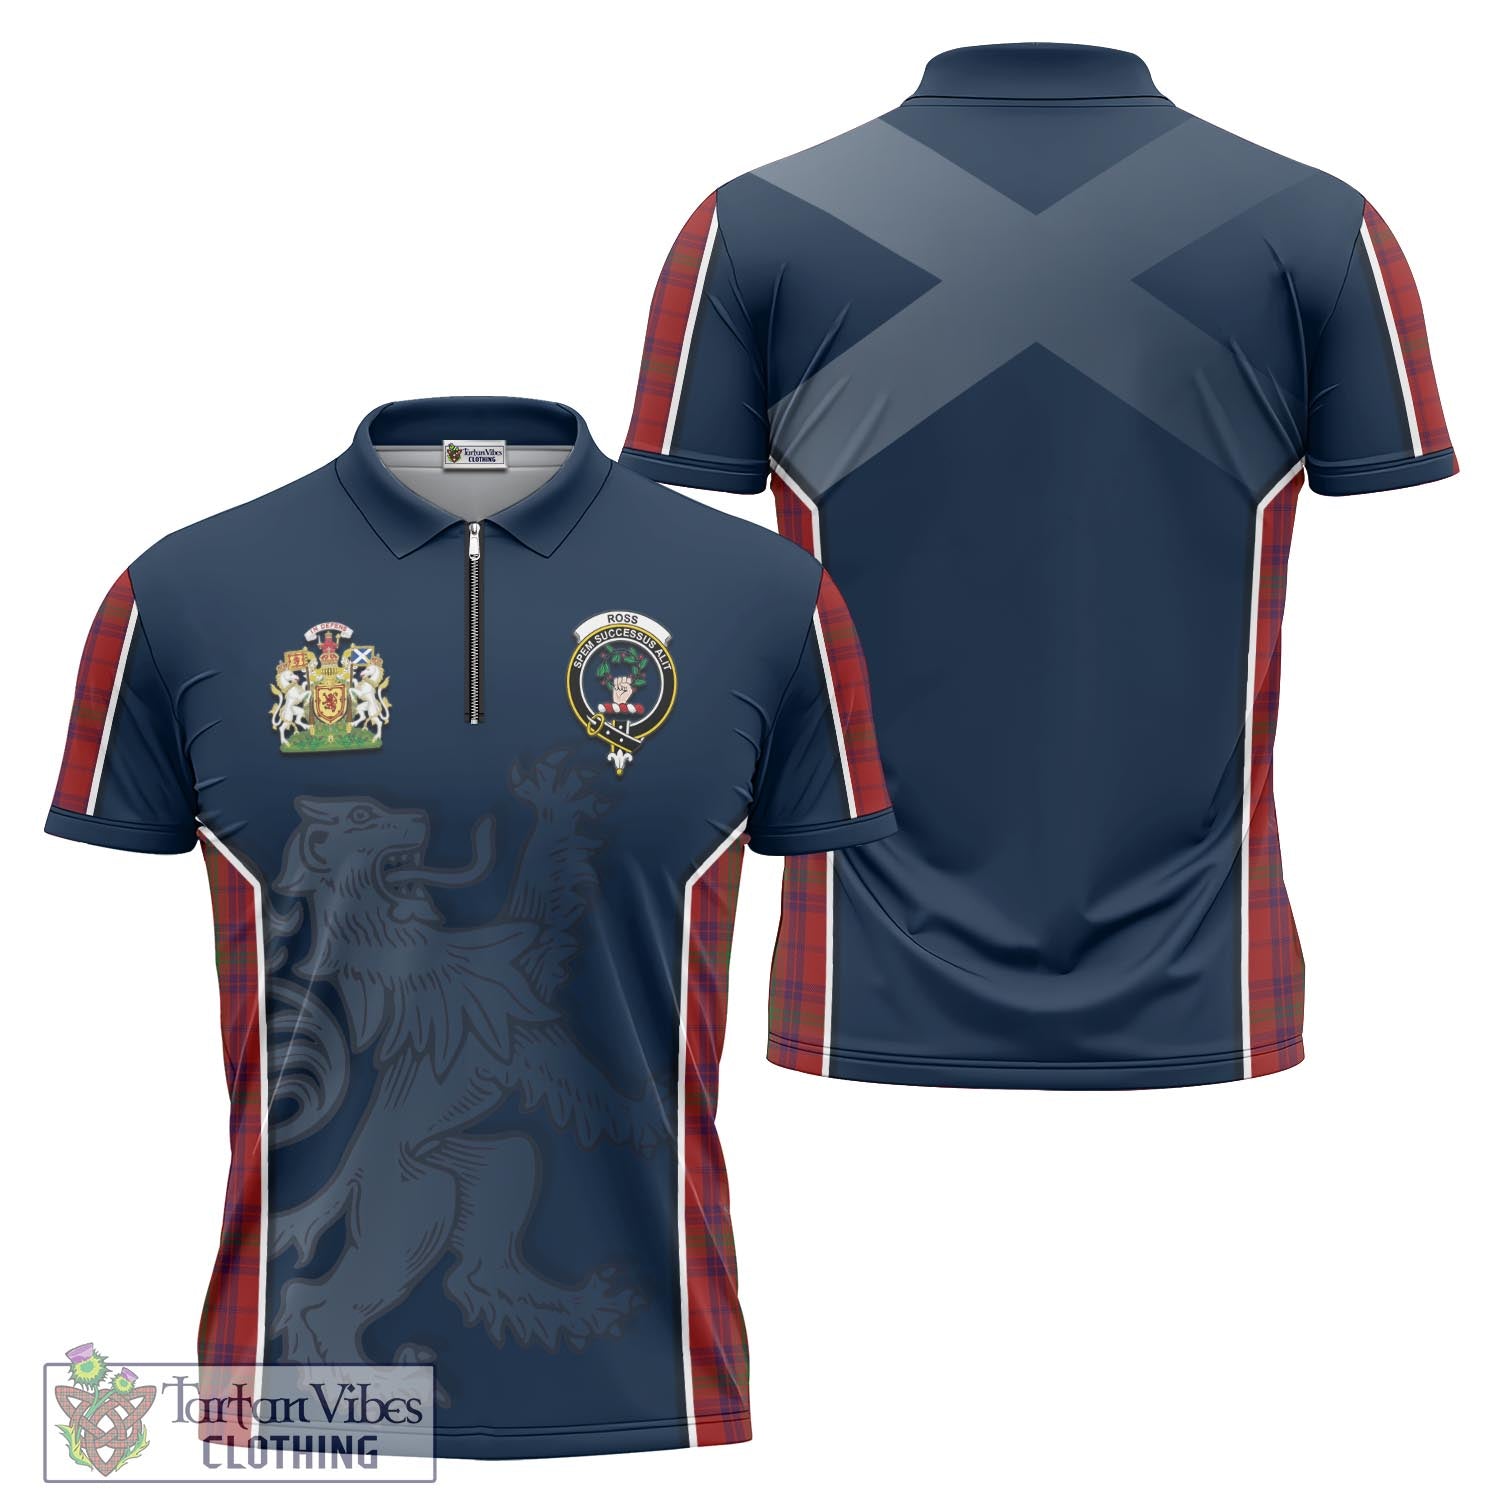 Tartan Vibes Clothing Ross Old Tartan Zipper Polo Shirt with Family Crest and Lion Rampant Vibes Sport Style